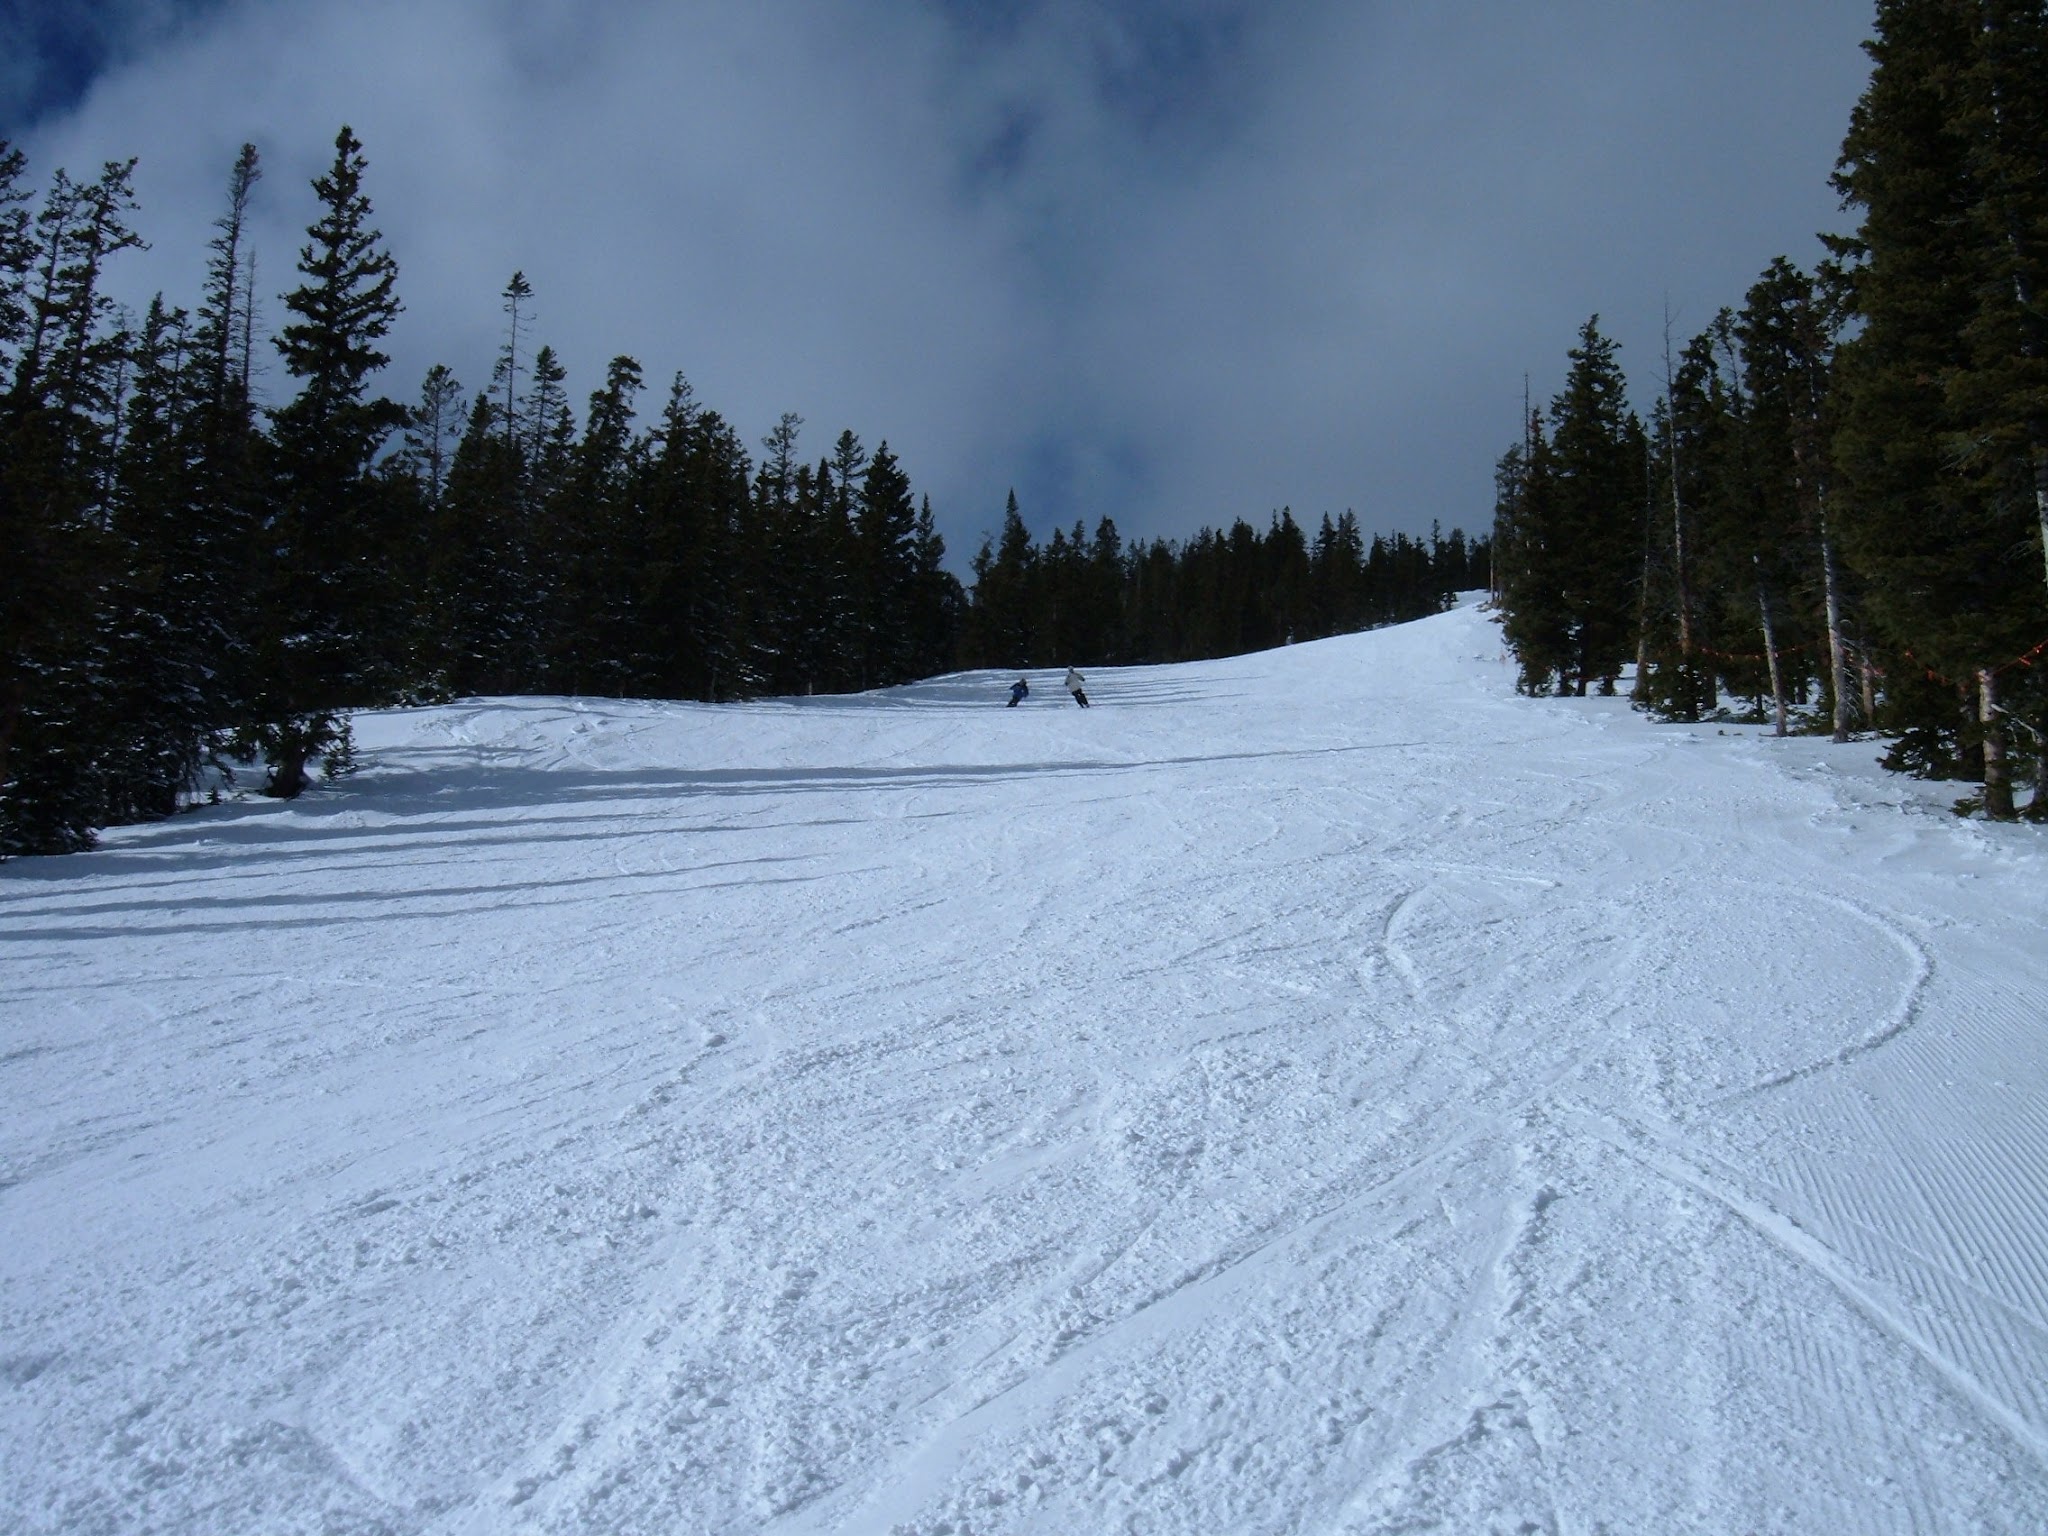 Groomed trail at a ski area on a sunny day.